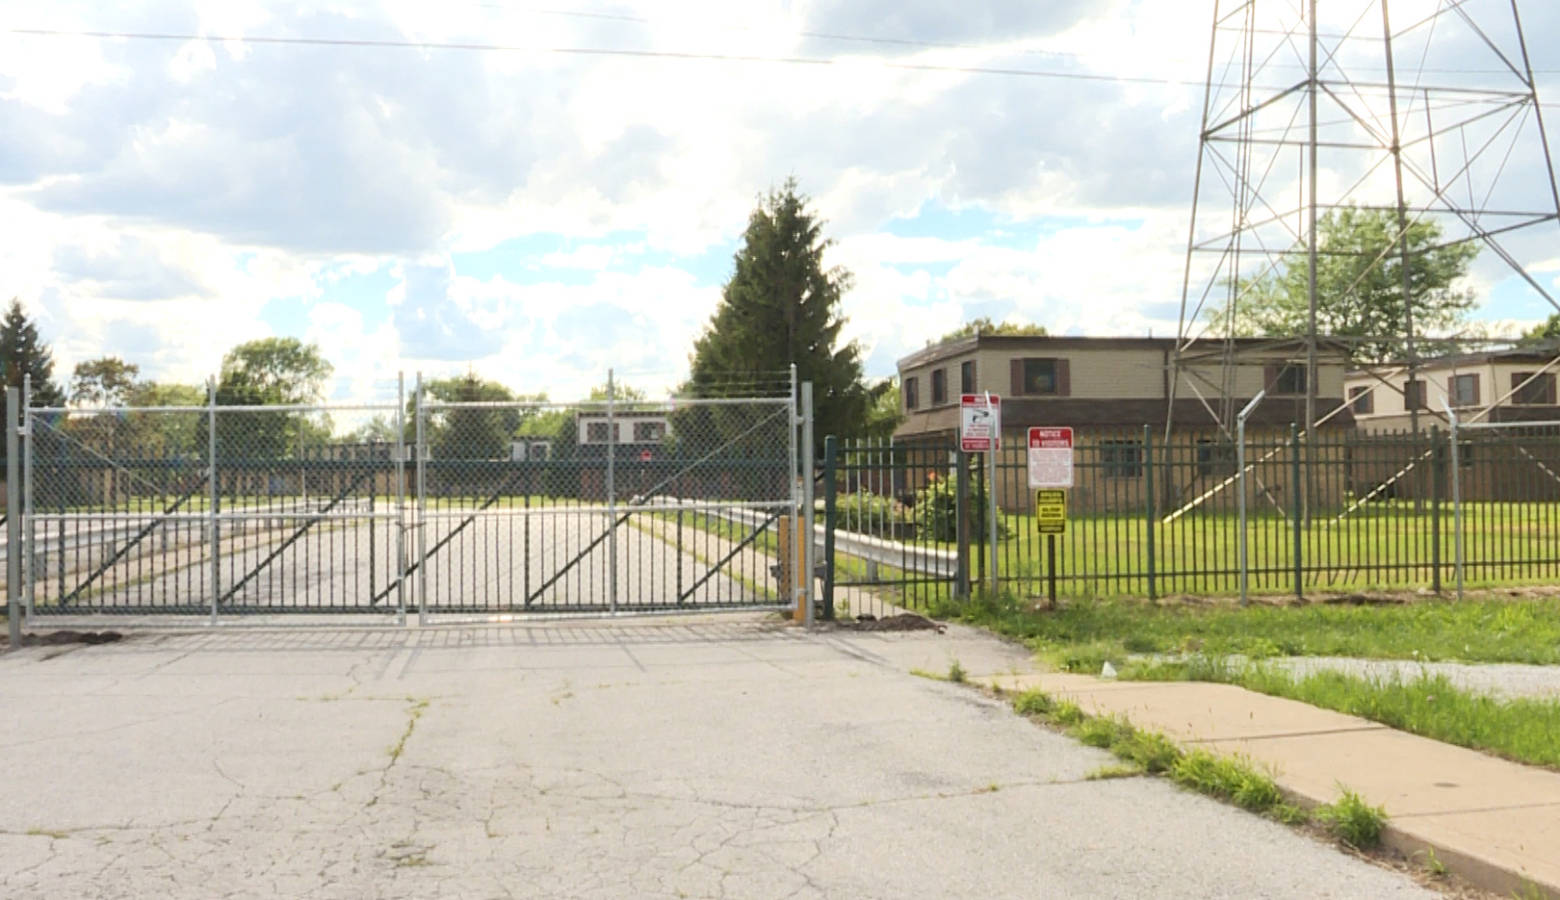 The now-vacant West Calumet Housing Complex has high levels of lead and arsenic in its soil. (IPB file photo)